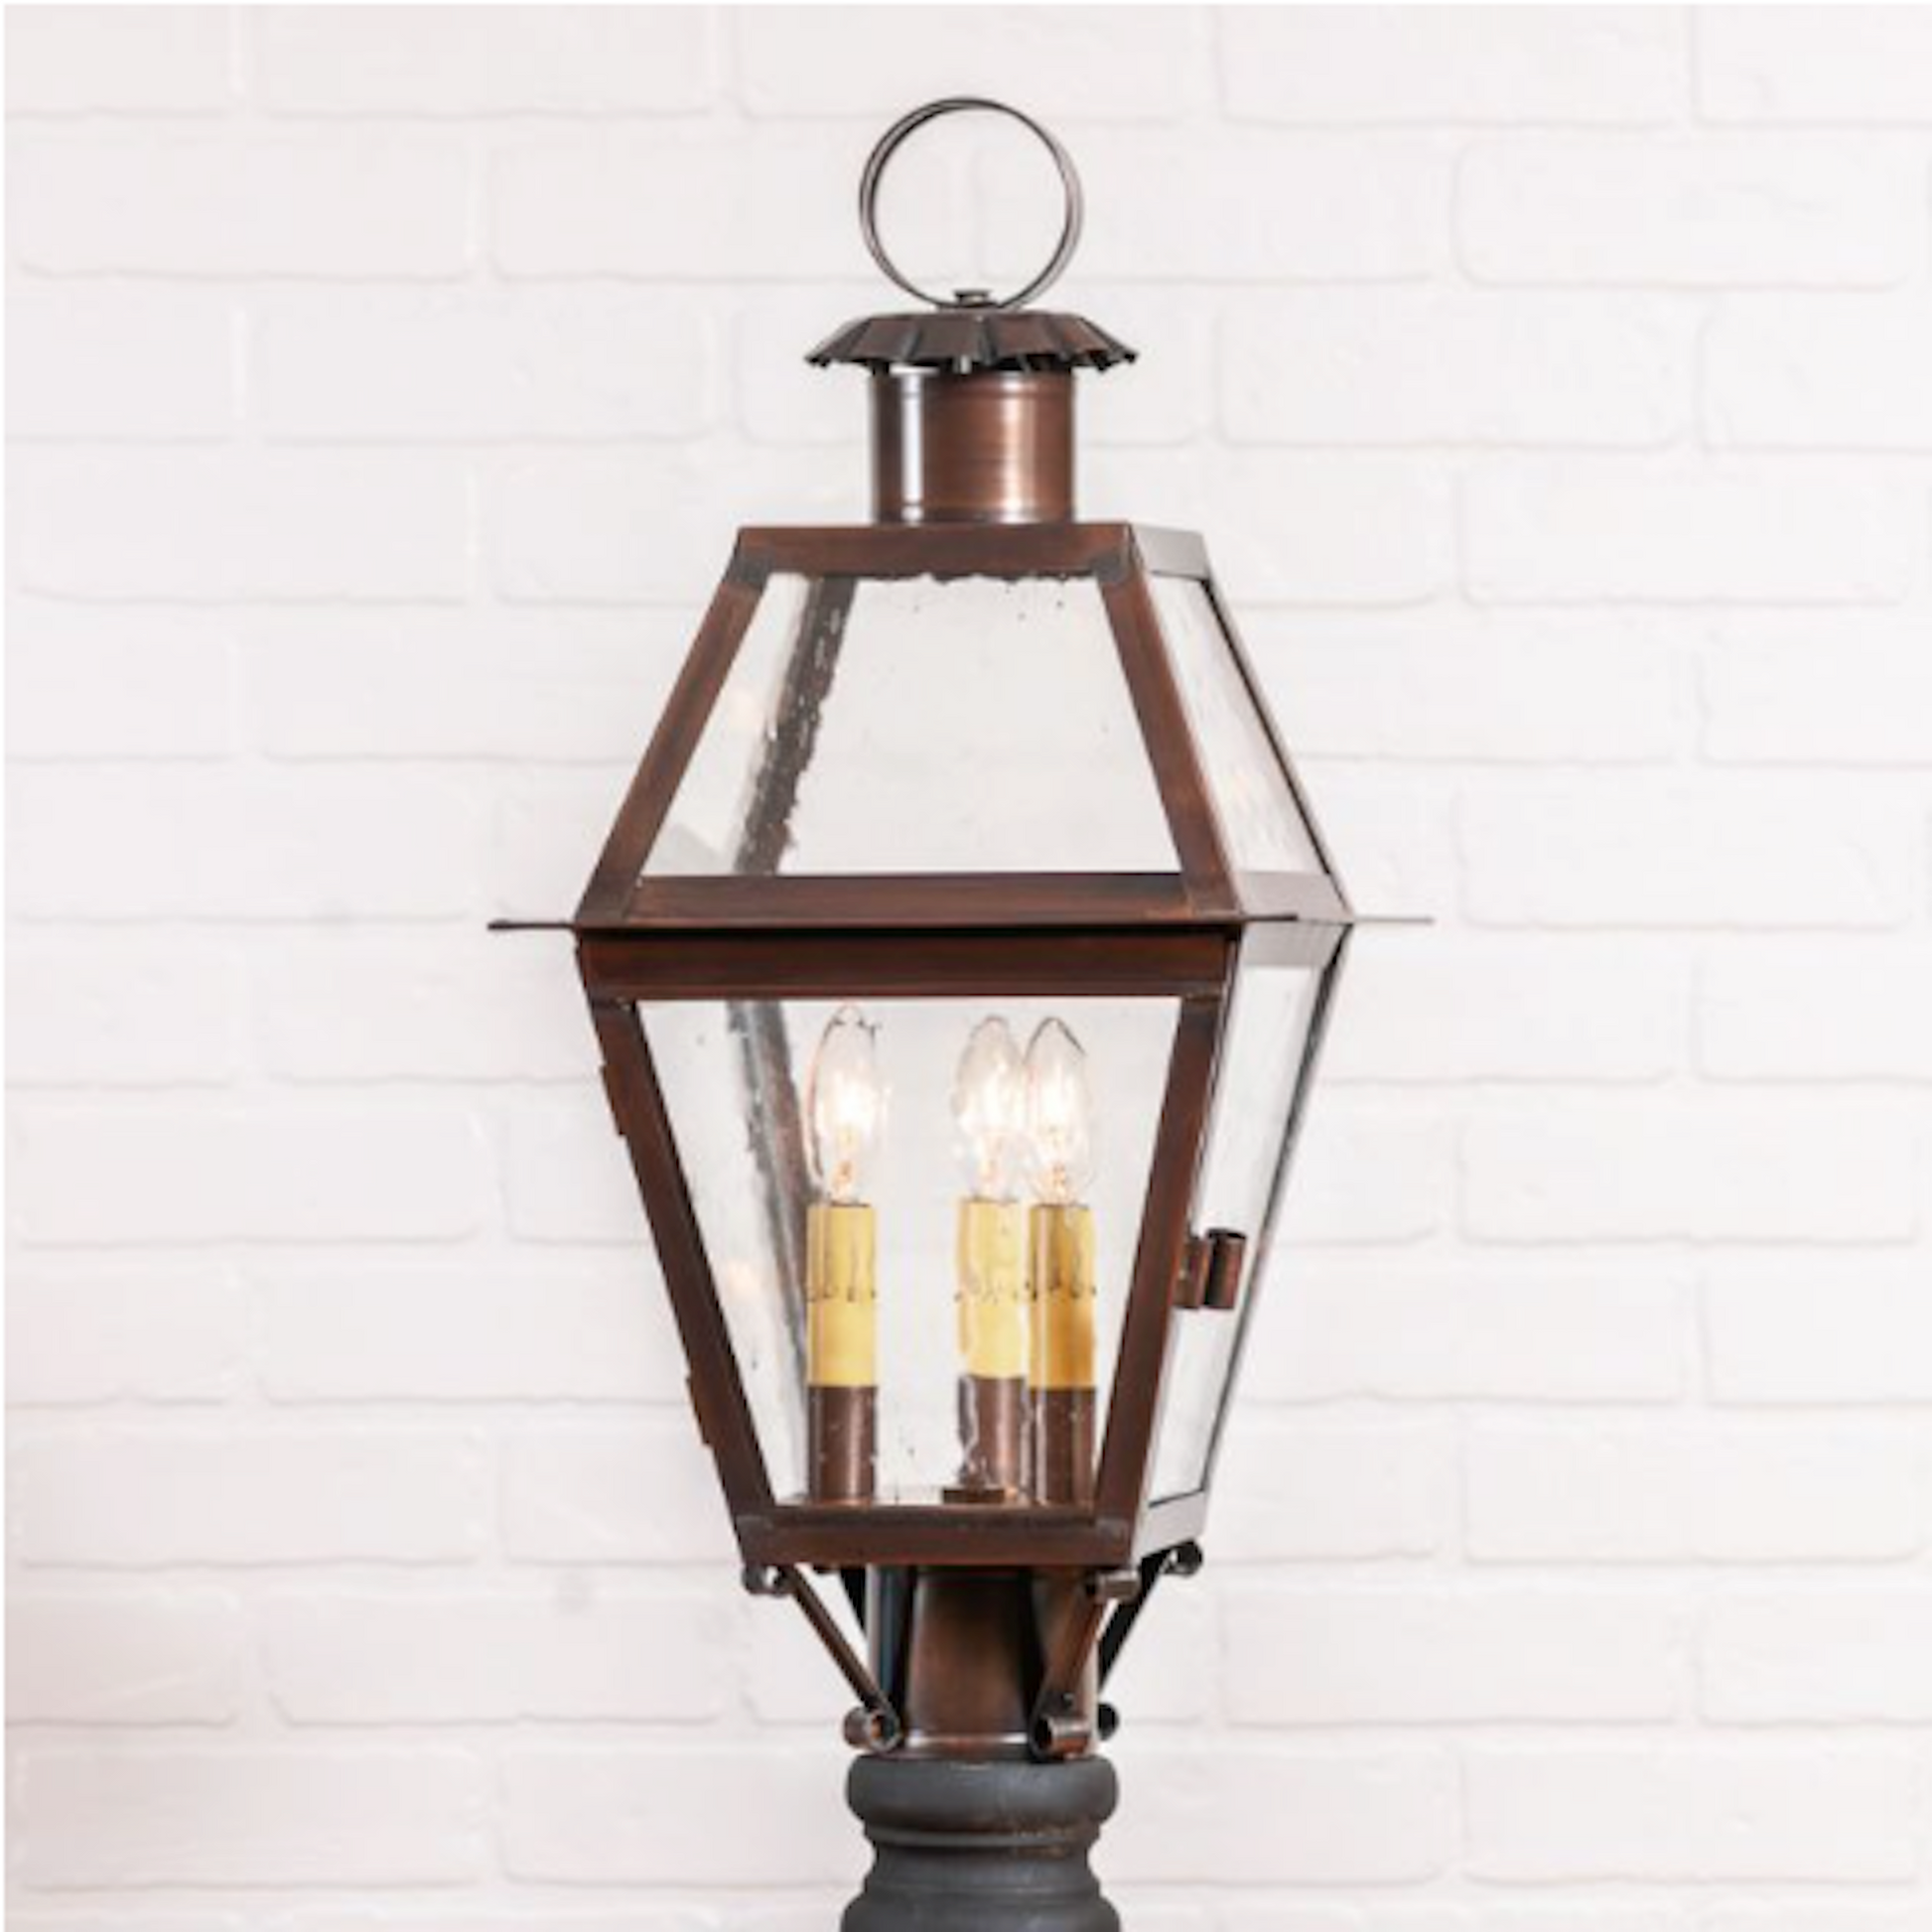 Vintage | Colonial Revival | Small Post Lantern